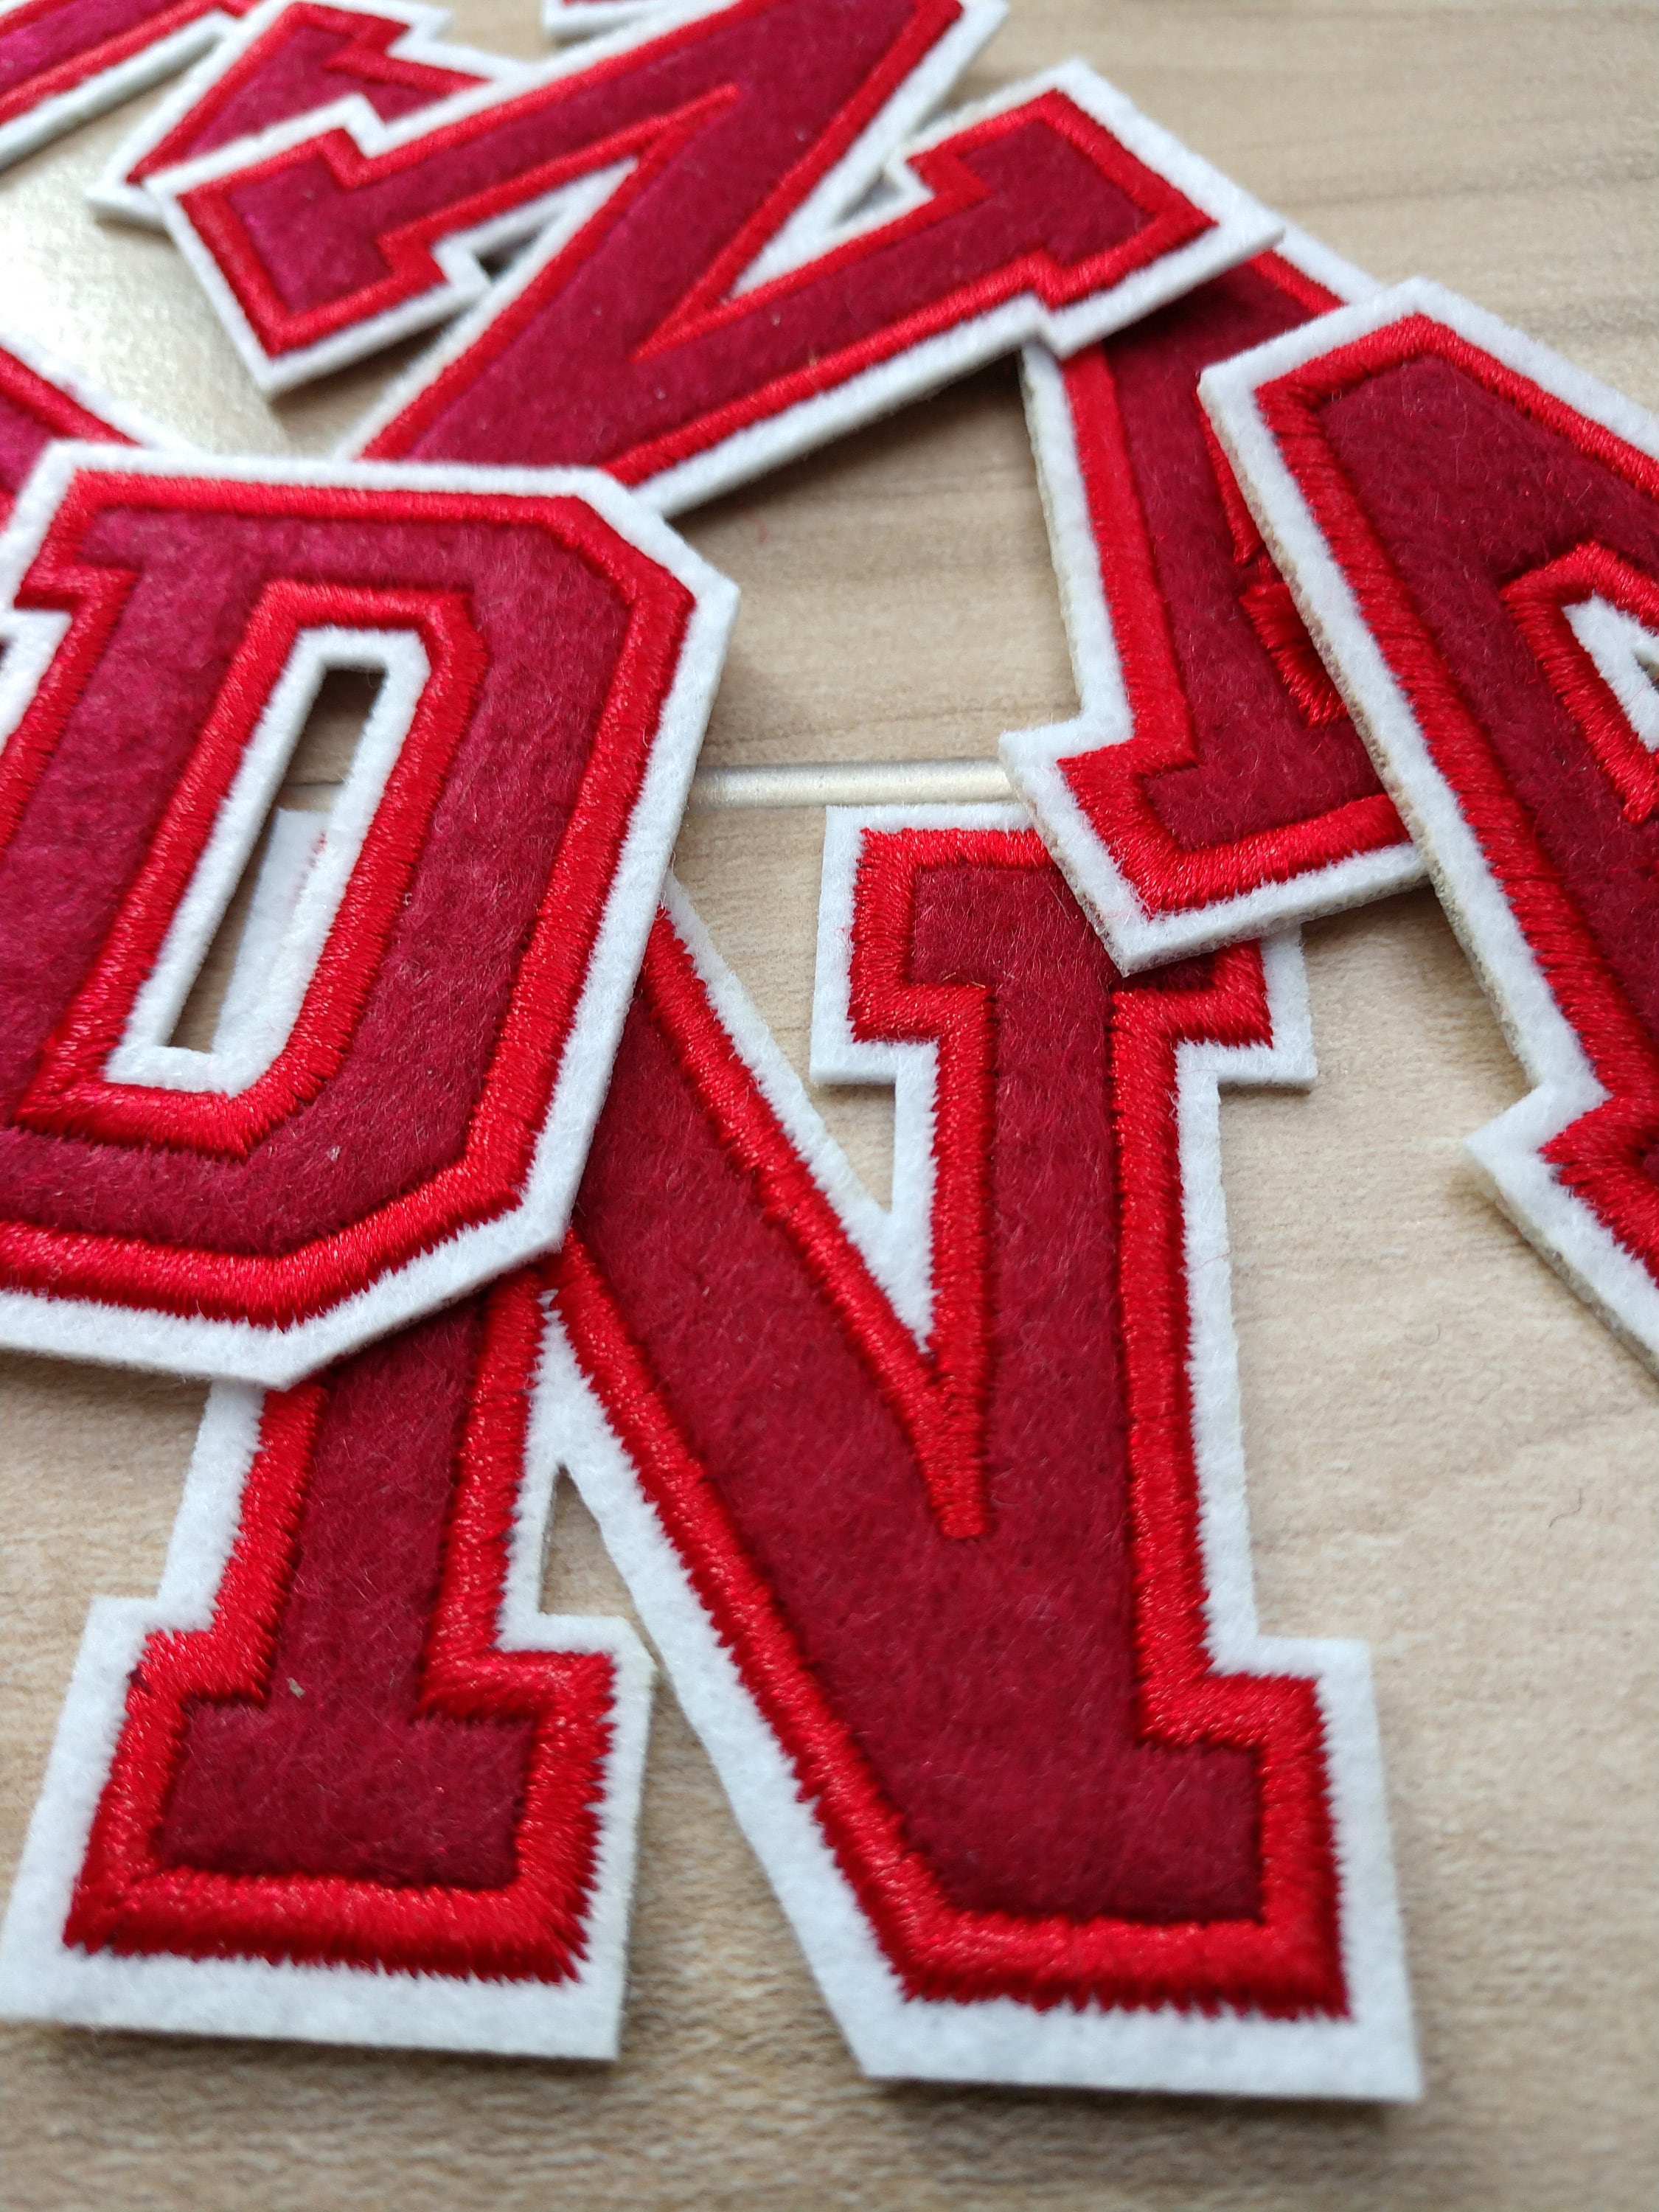 Define Your Looks And Sentiment With Iron on Letter Patches